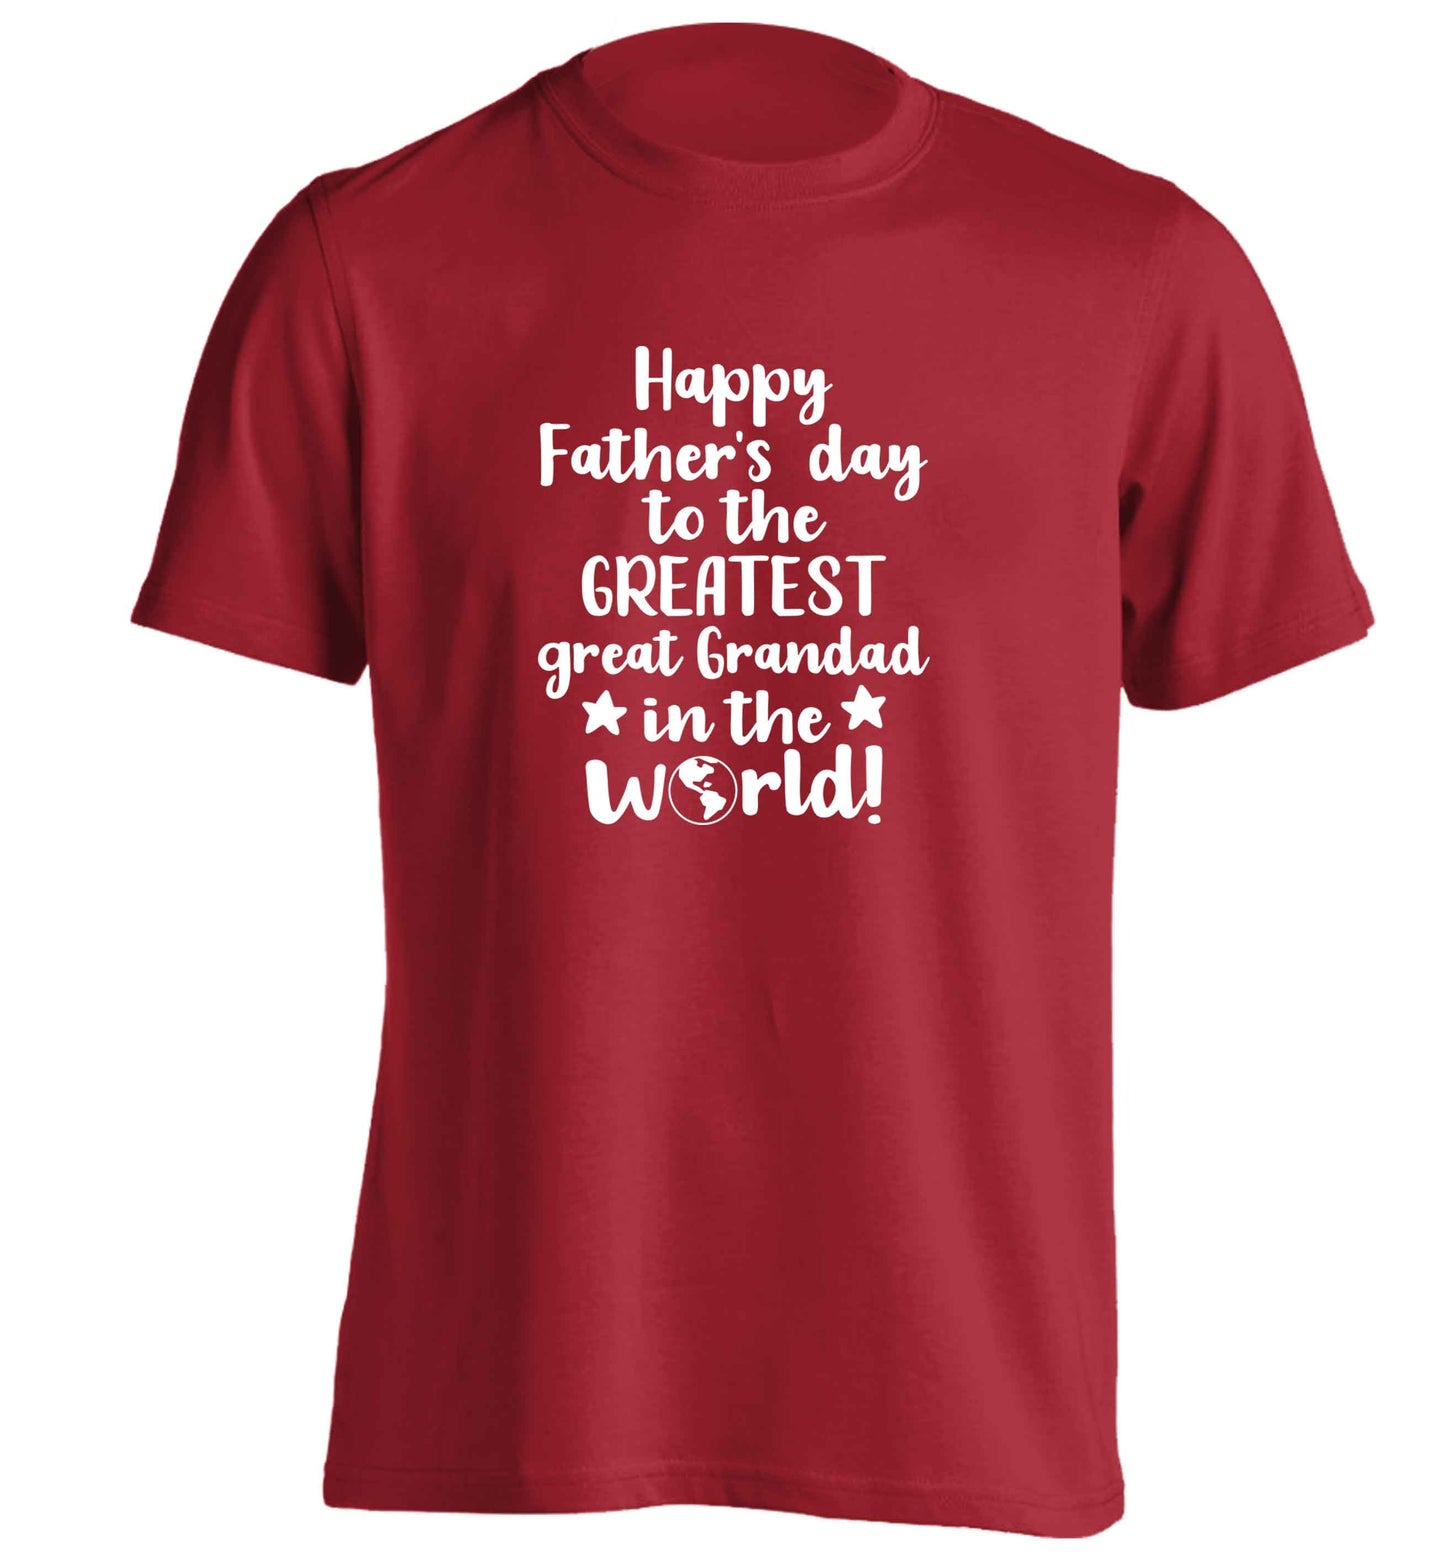 Happy Father's day to the greatest great grandad in the world adults unisex red Tshirt 2XL